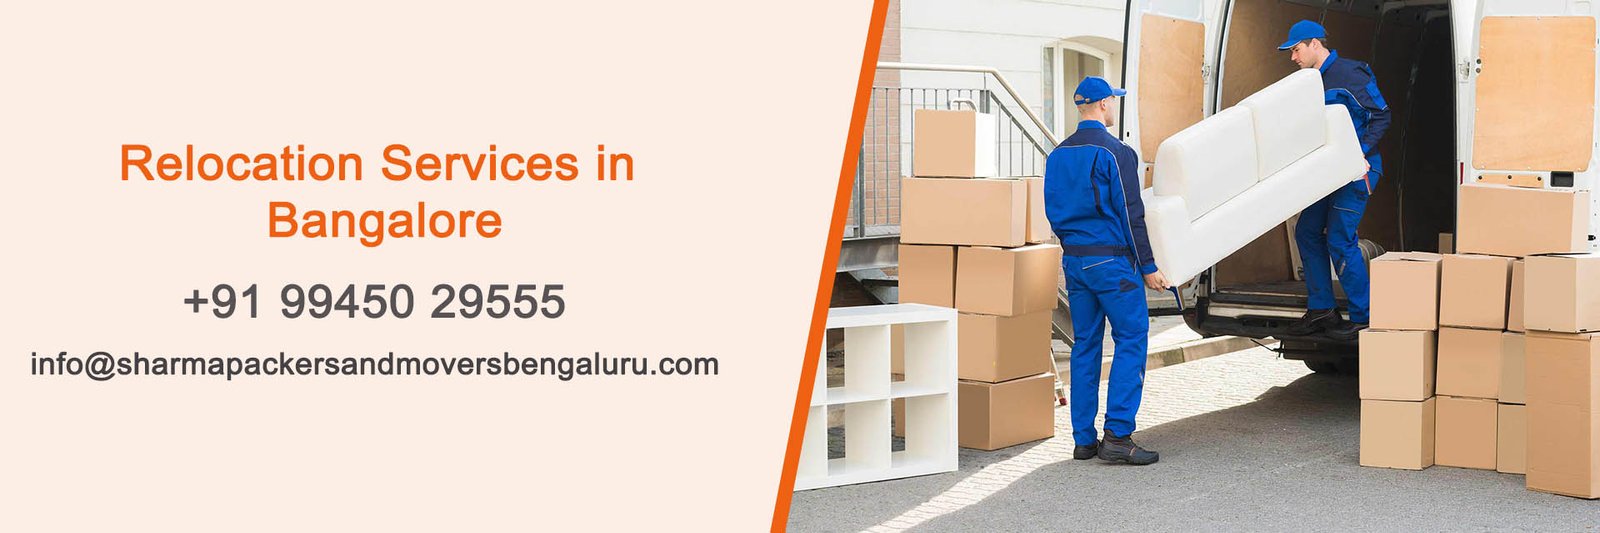 Relocation Services in Bangalore